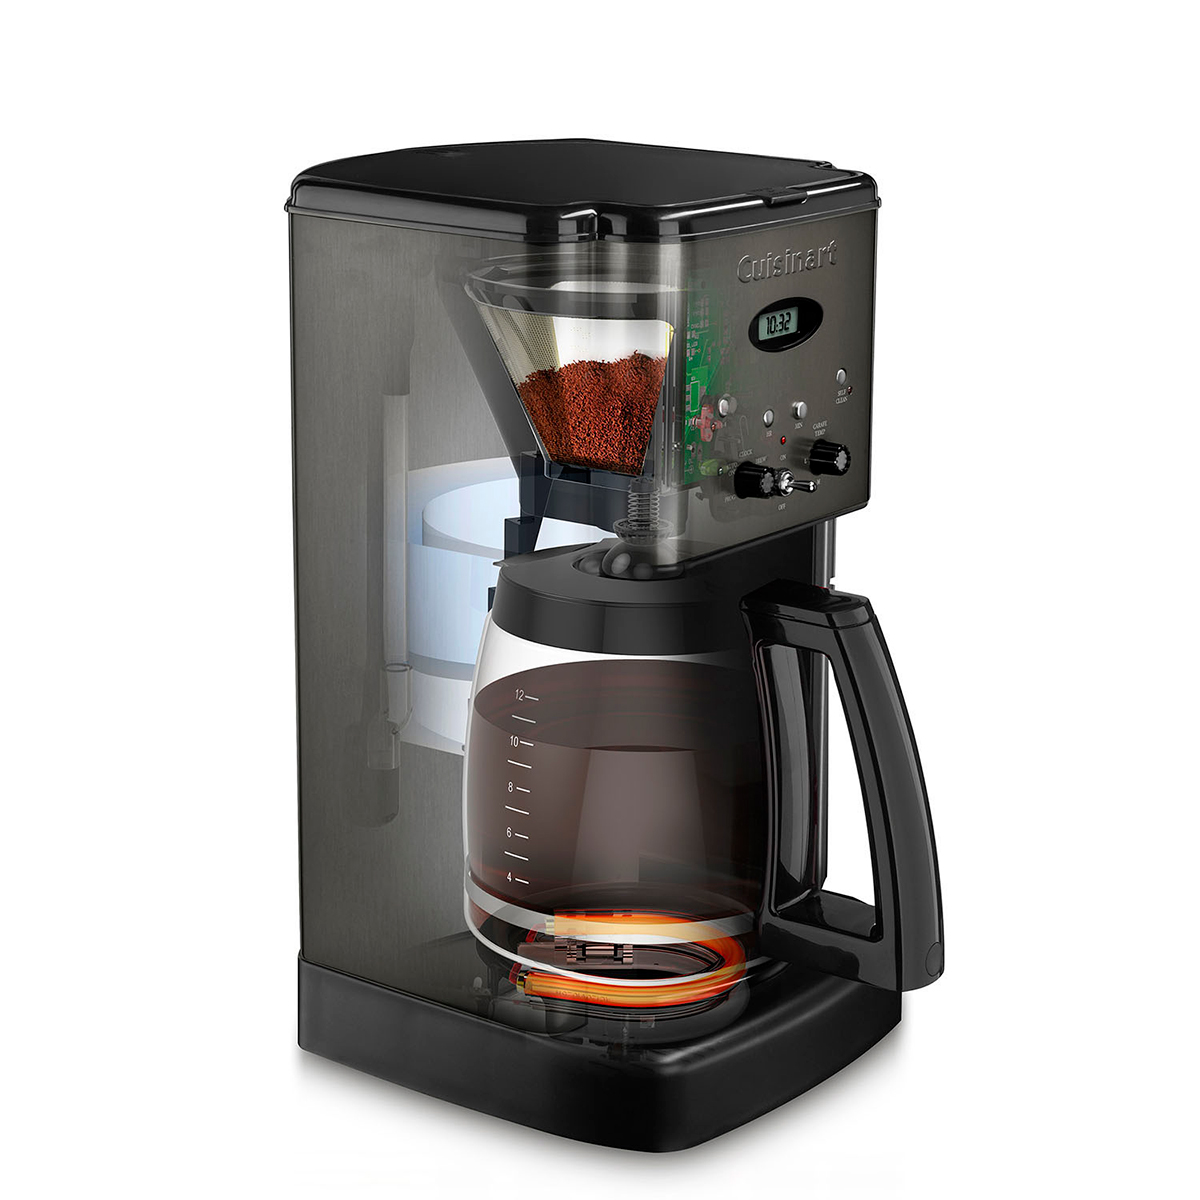 Cuisinart(R) Brew Central(tm) 12 Cup Programmable Coffee Maker